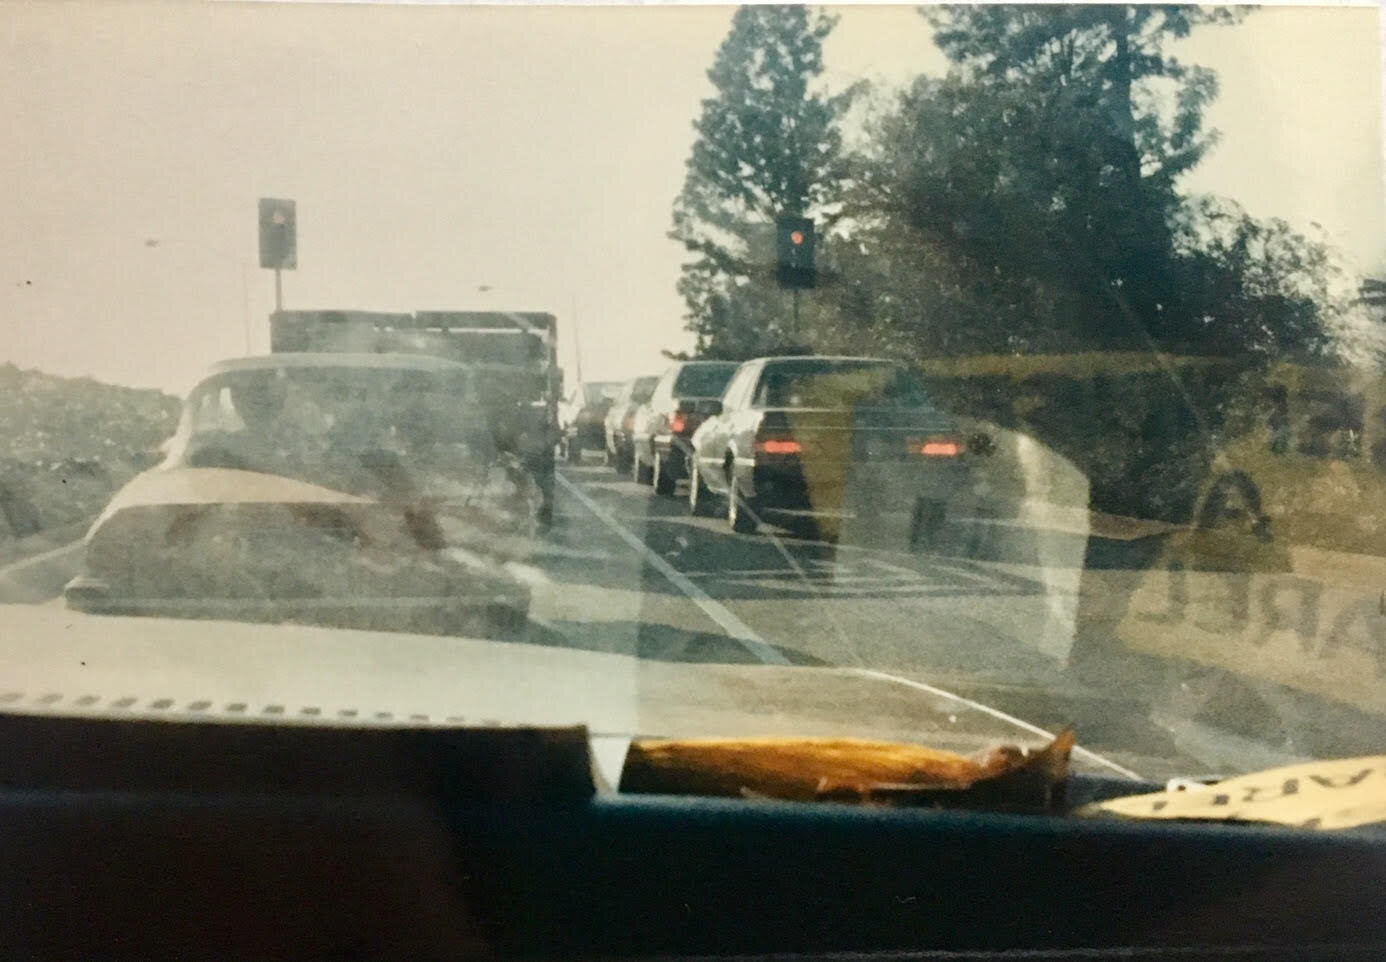  Photo from dated 6-24-86 thought to be from the San Diego roadtrip where Dan and Susan experienced their 2nd missing time episode. 